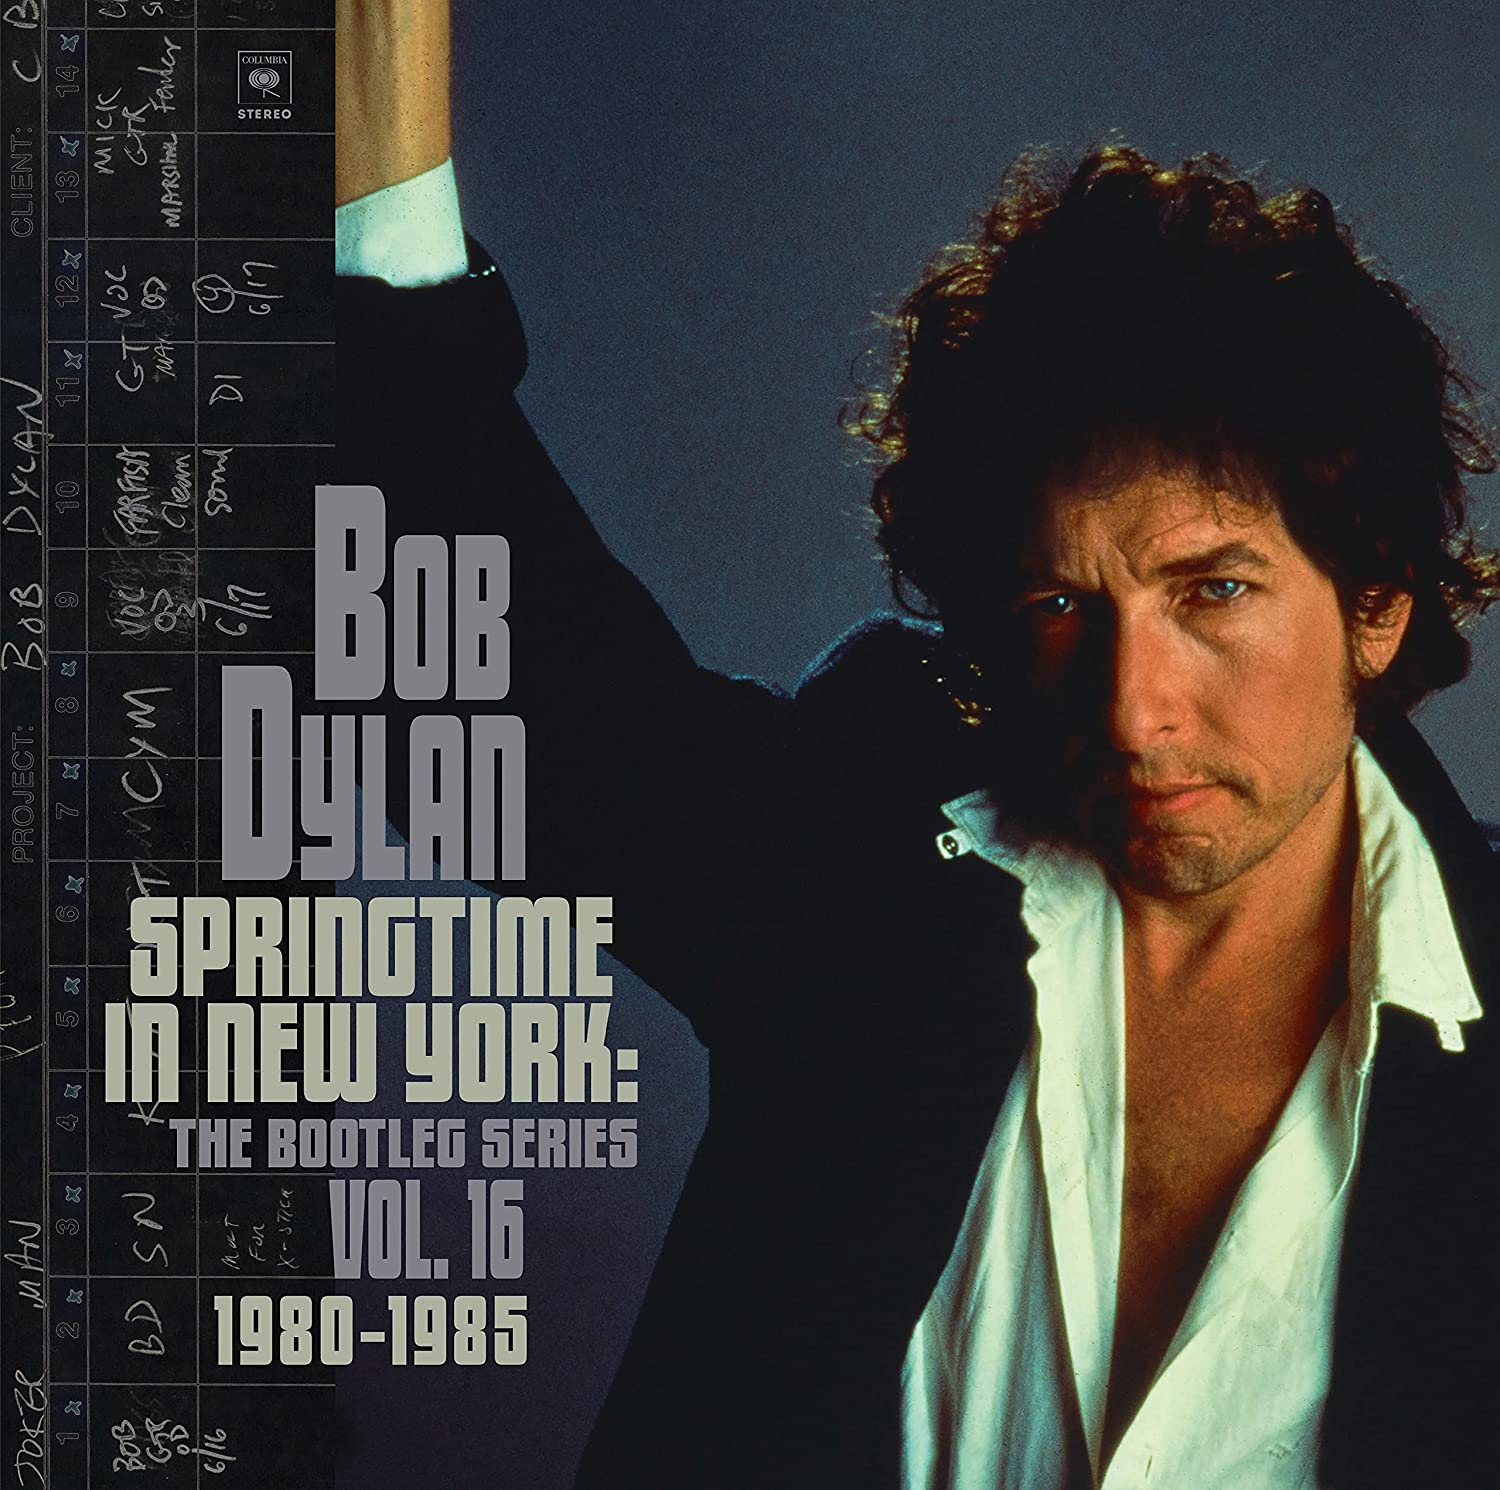 Bob Dylan - Springtime In New York: The Bootleg Series Vol. 16 1980-1985 (Deluxe Edition) (2021) [FLAC 24bit/44,1kHz]